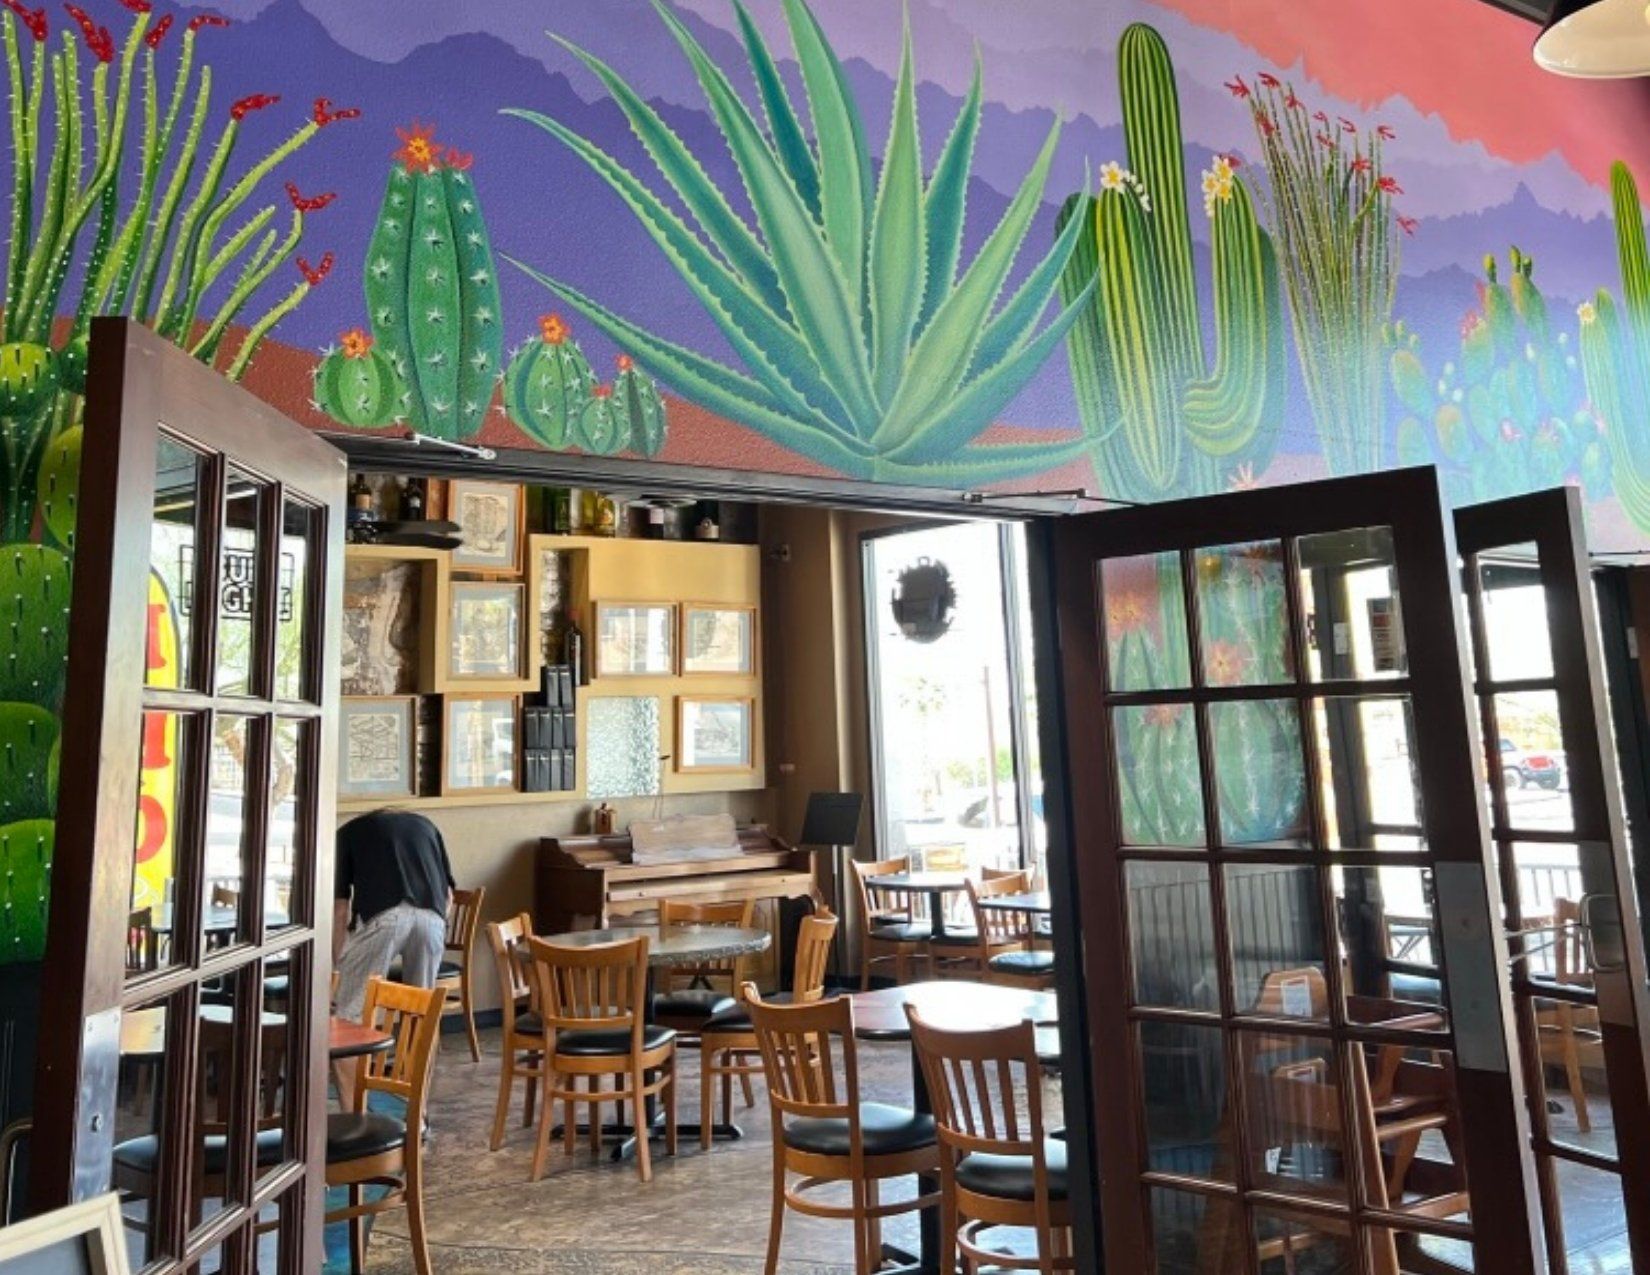 Inside seating at the Kitchen Art Work Space with a desert themed mural